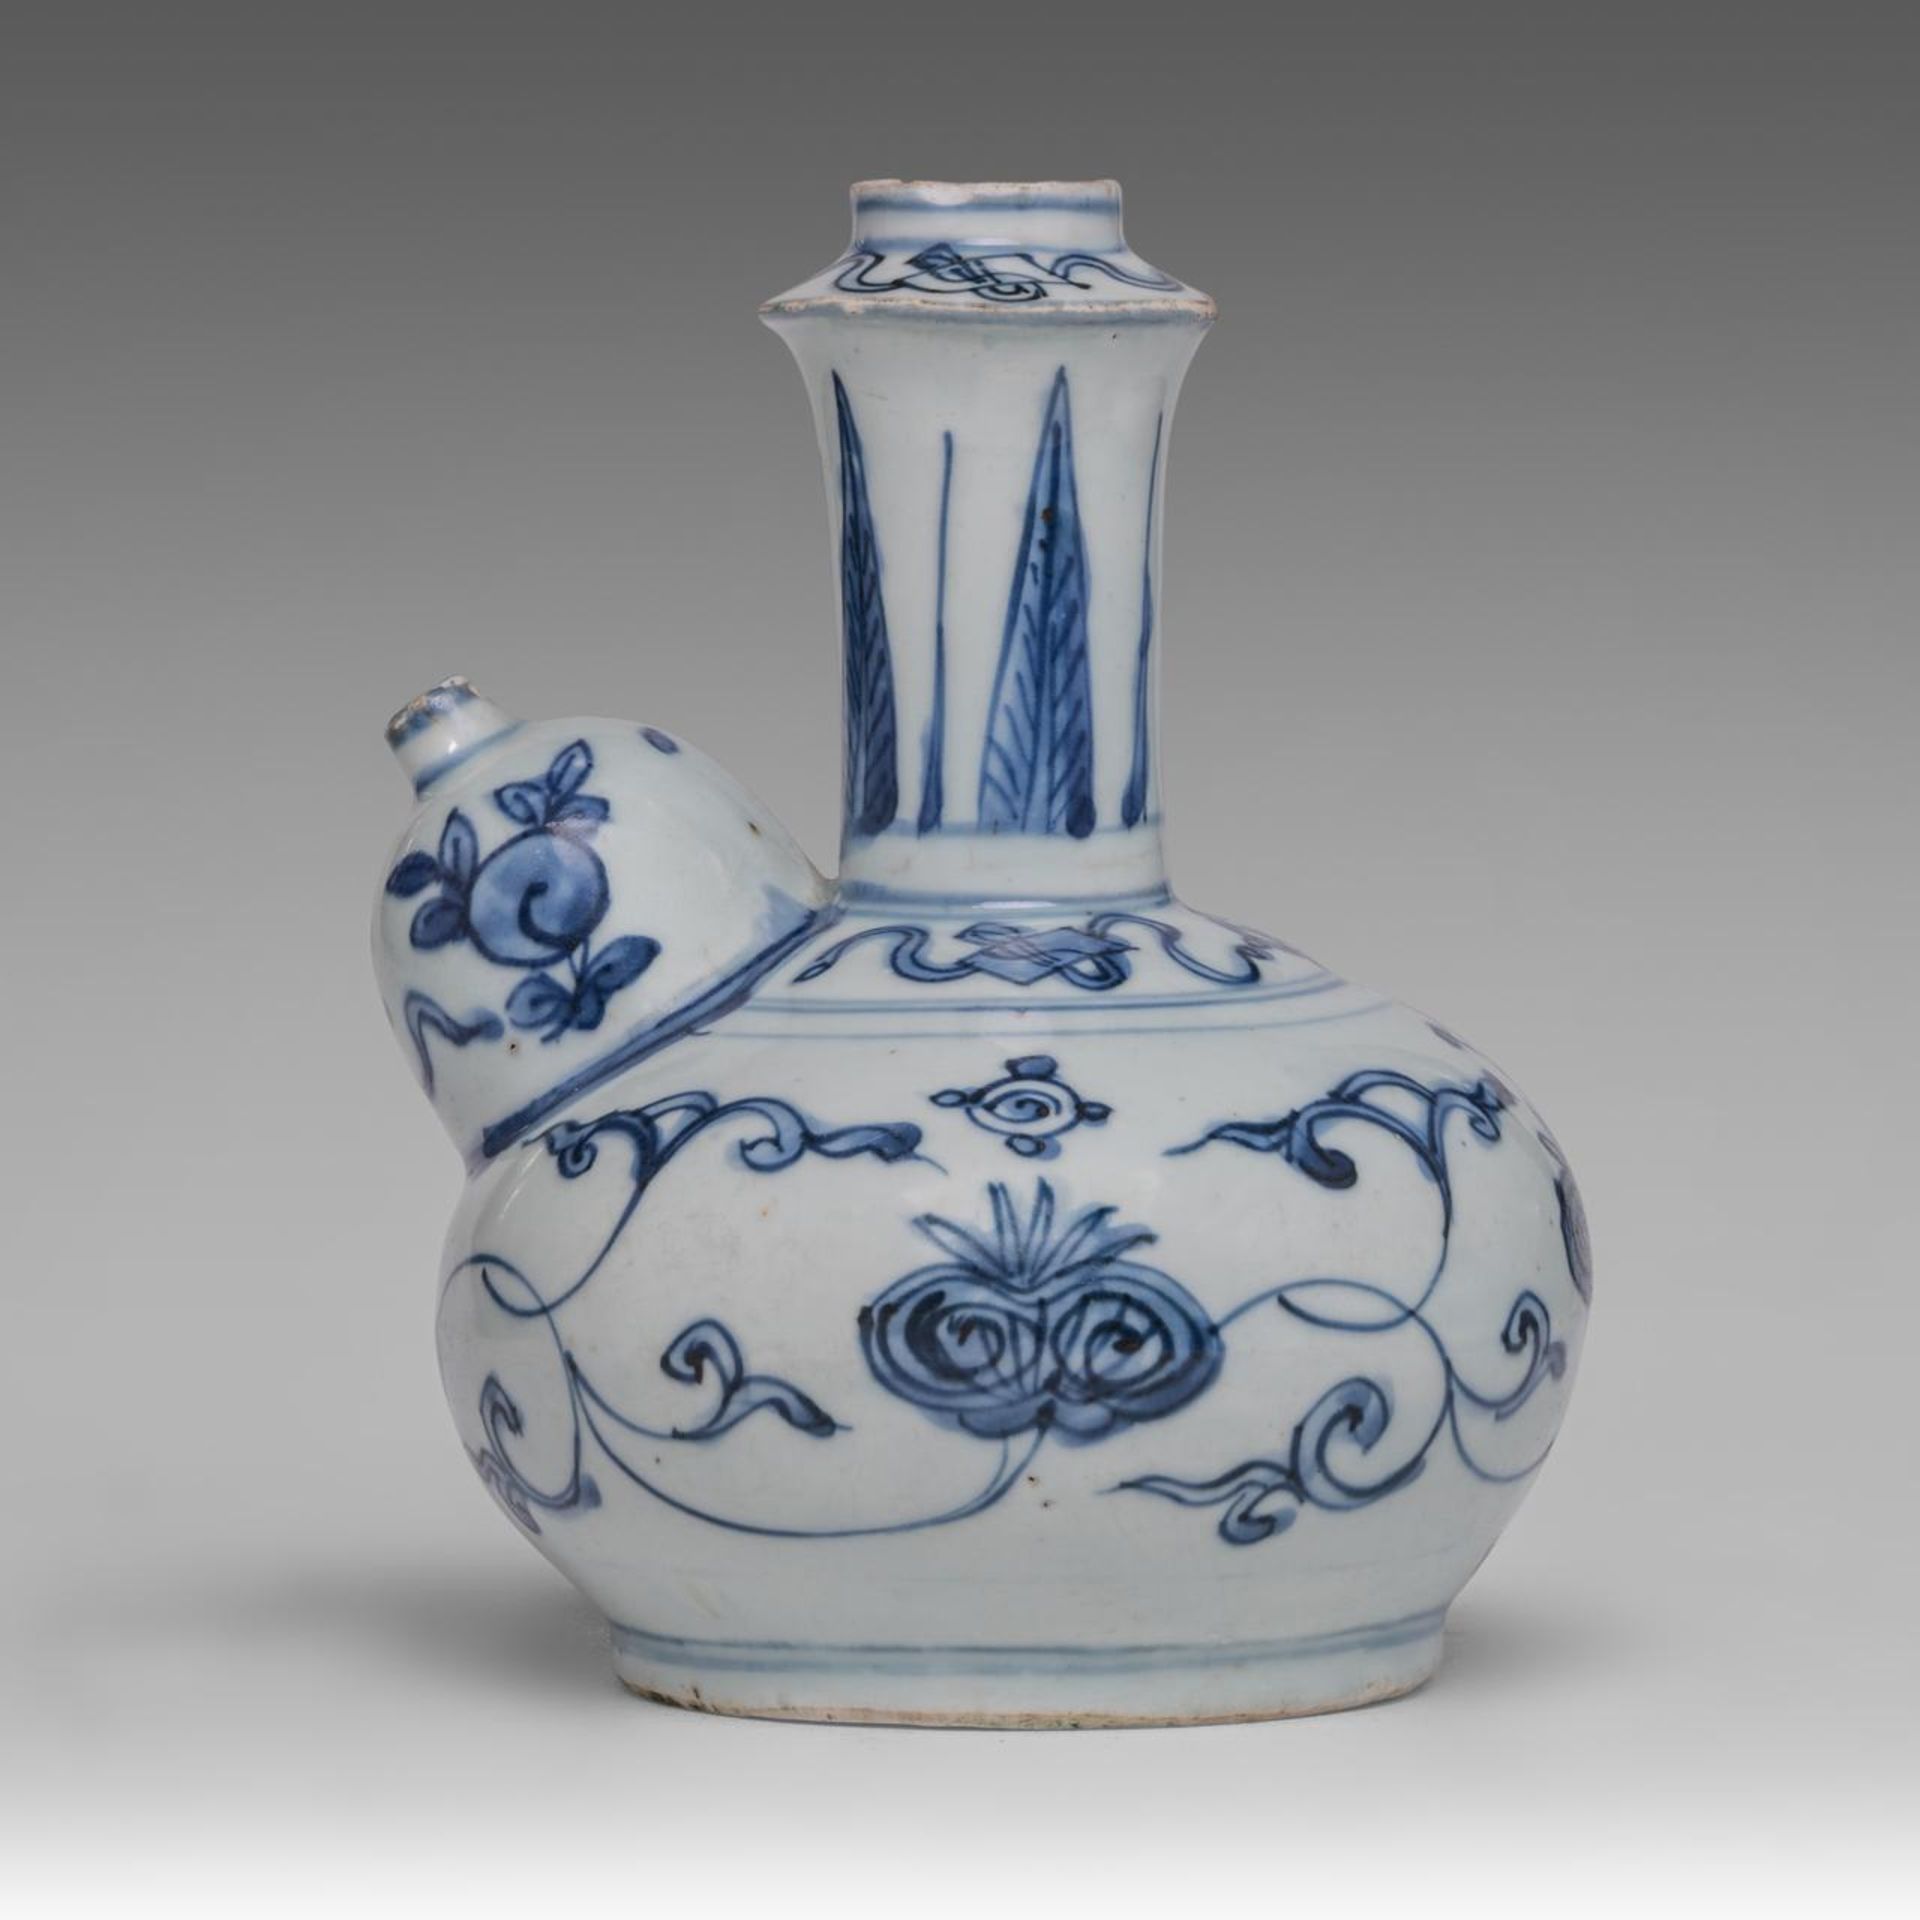 A Chinese blue and white 'Pomegranate' kendi jug, Ming dynasty, H 18 cm